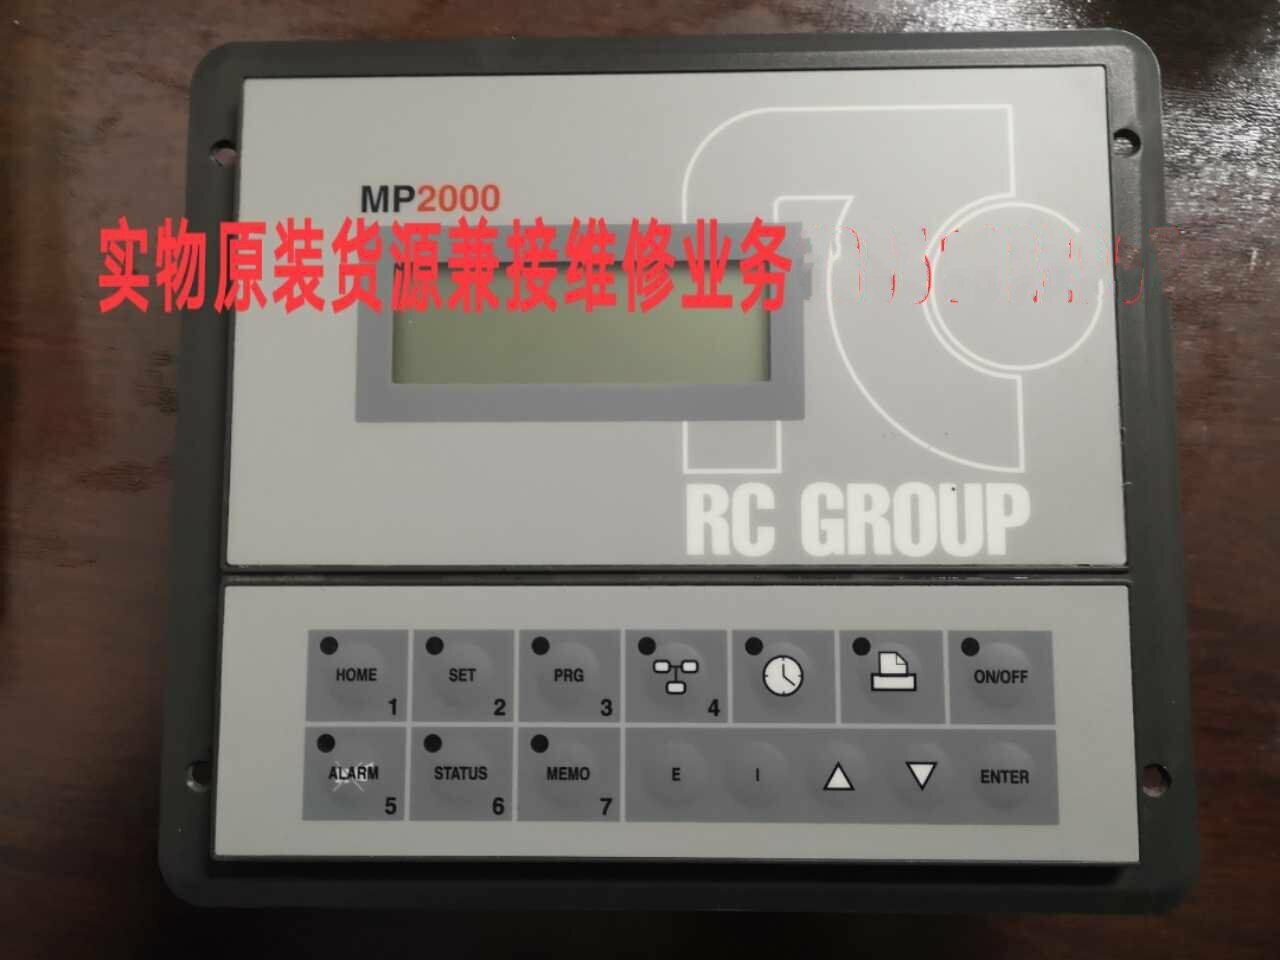 1PC FOR 100% test  RC GROUP MP2000 PCOIRC0CB0 (by DHL or Fedex  90days Warranty)